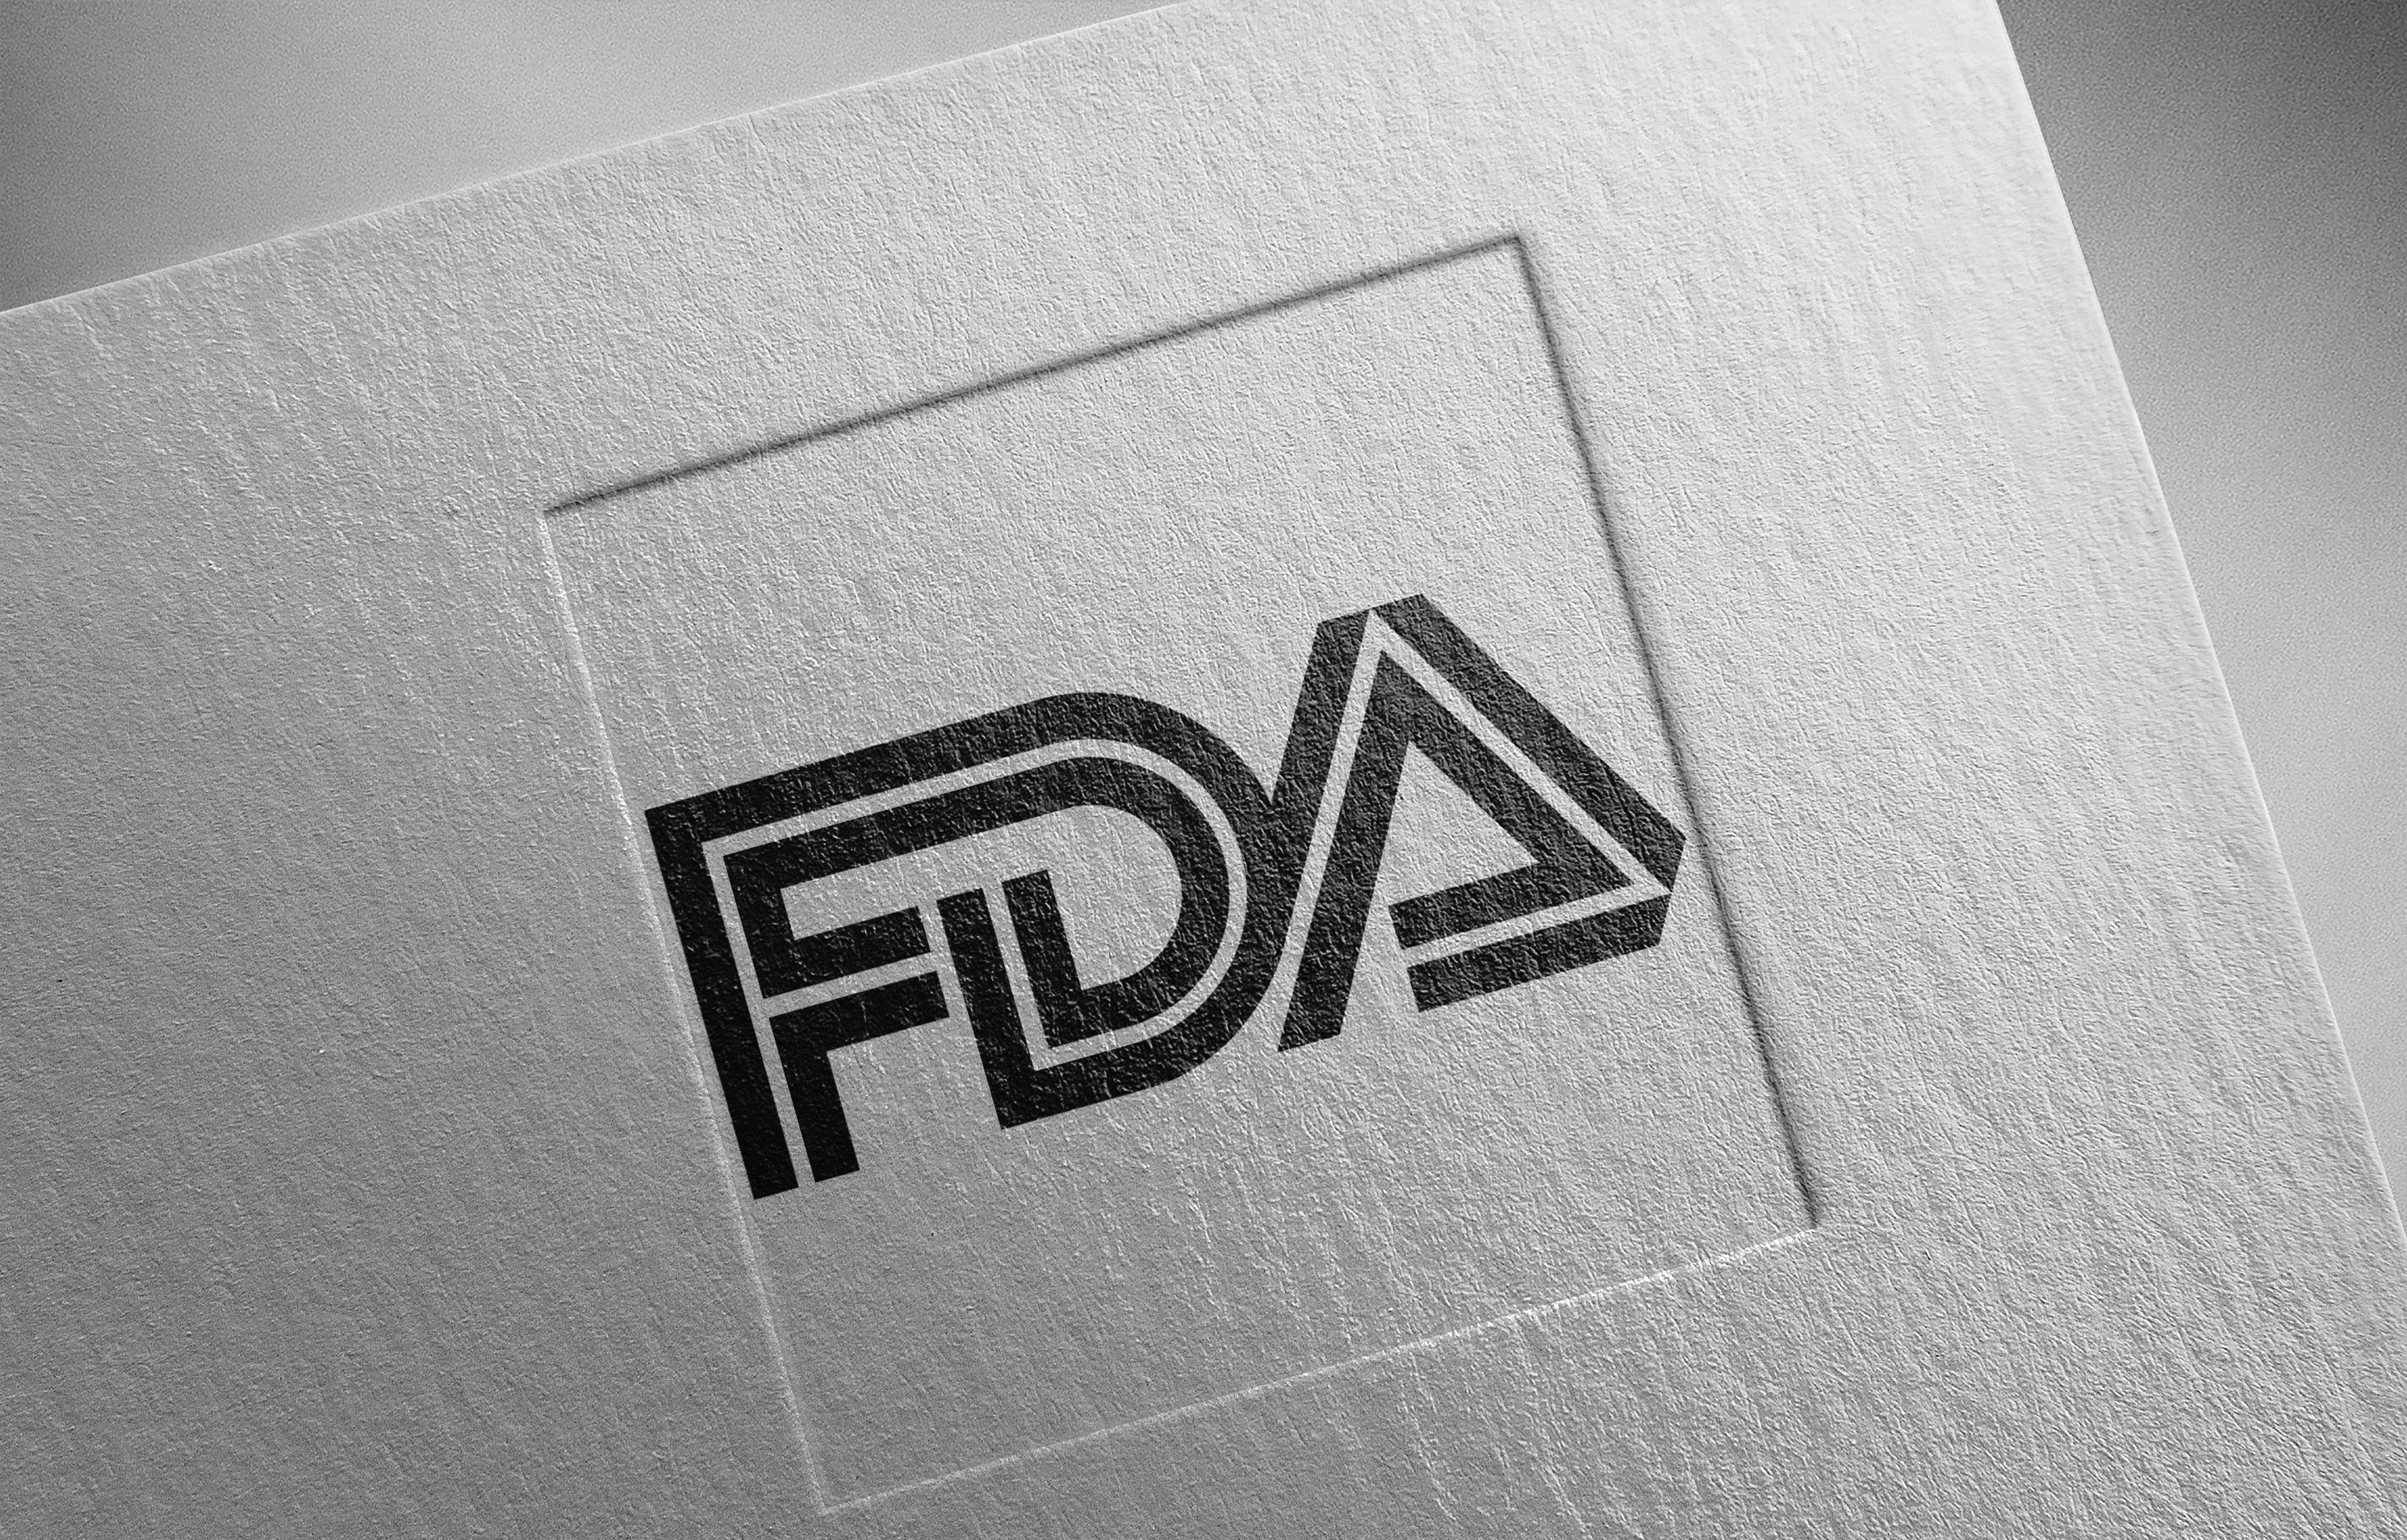 The FDA has assigned a Prescription Drug User Fee Act (PDUFA) goal date of October 22, 2023. (Adobe Stock image)